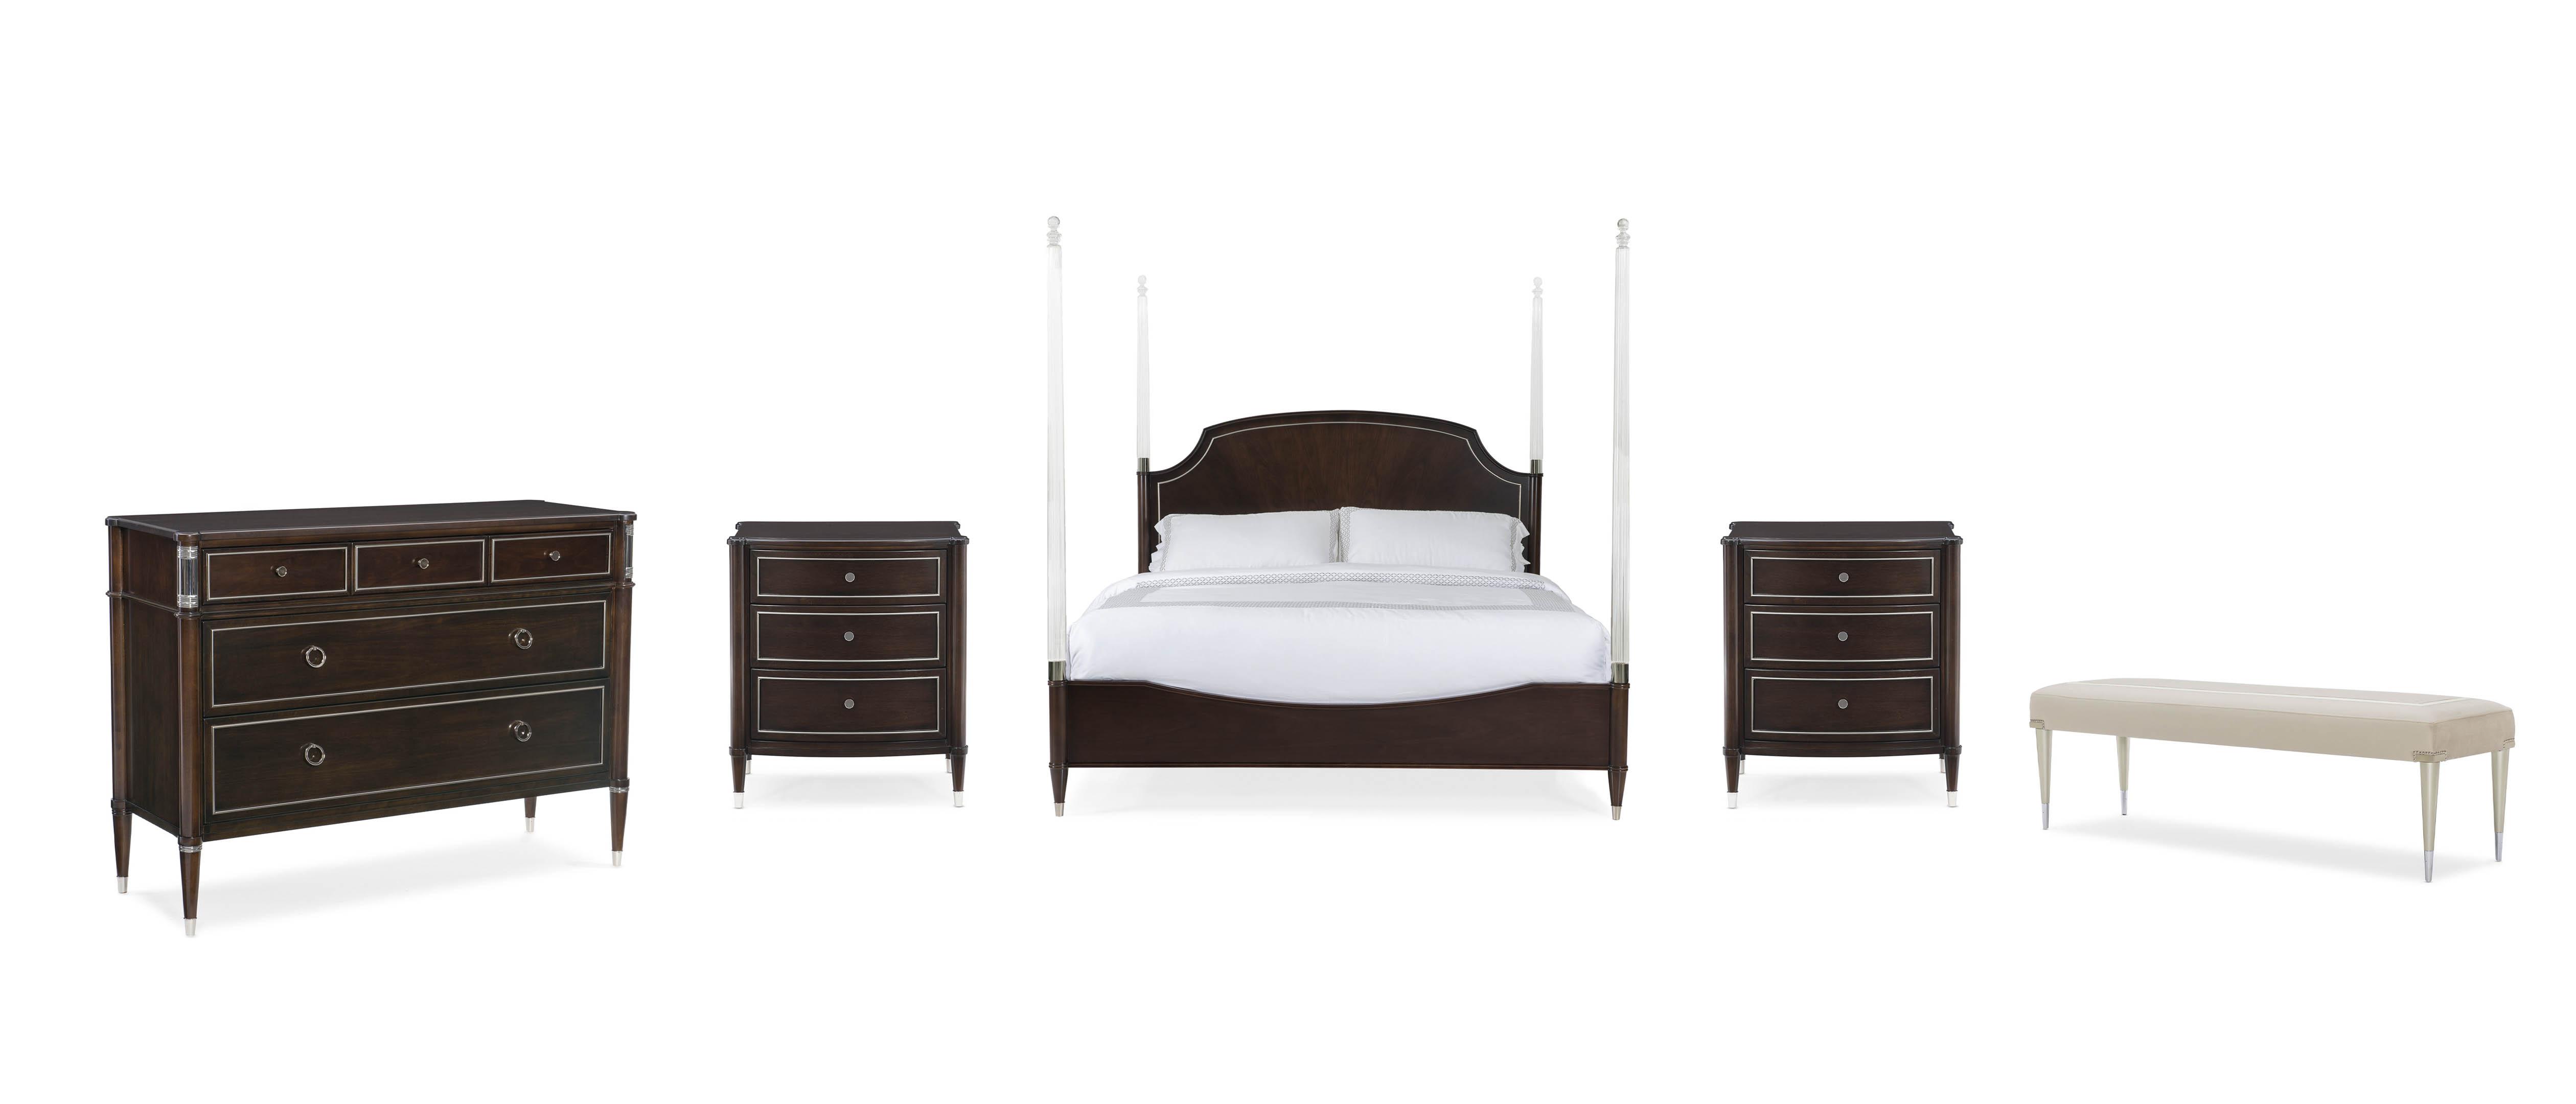 Contemporary Poster Bedroom Set SUITE DREAMS W/POST / SUITE YOURSELF / SUITE MATE / BOARDING ON BEAUTIFUL CLA-420-146-Set-5 in Dark Walnut 